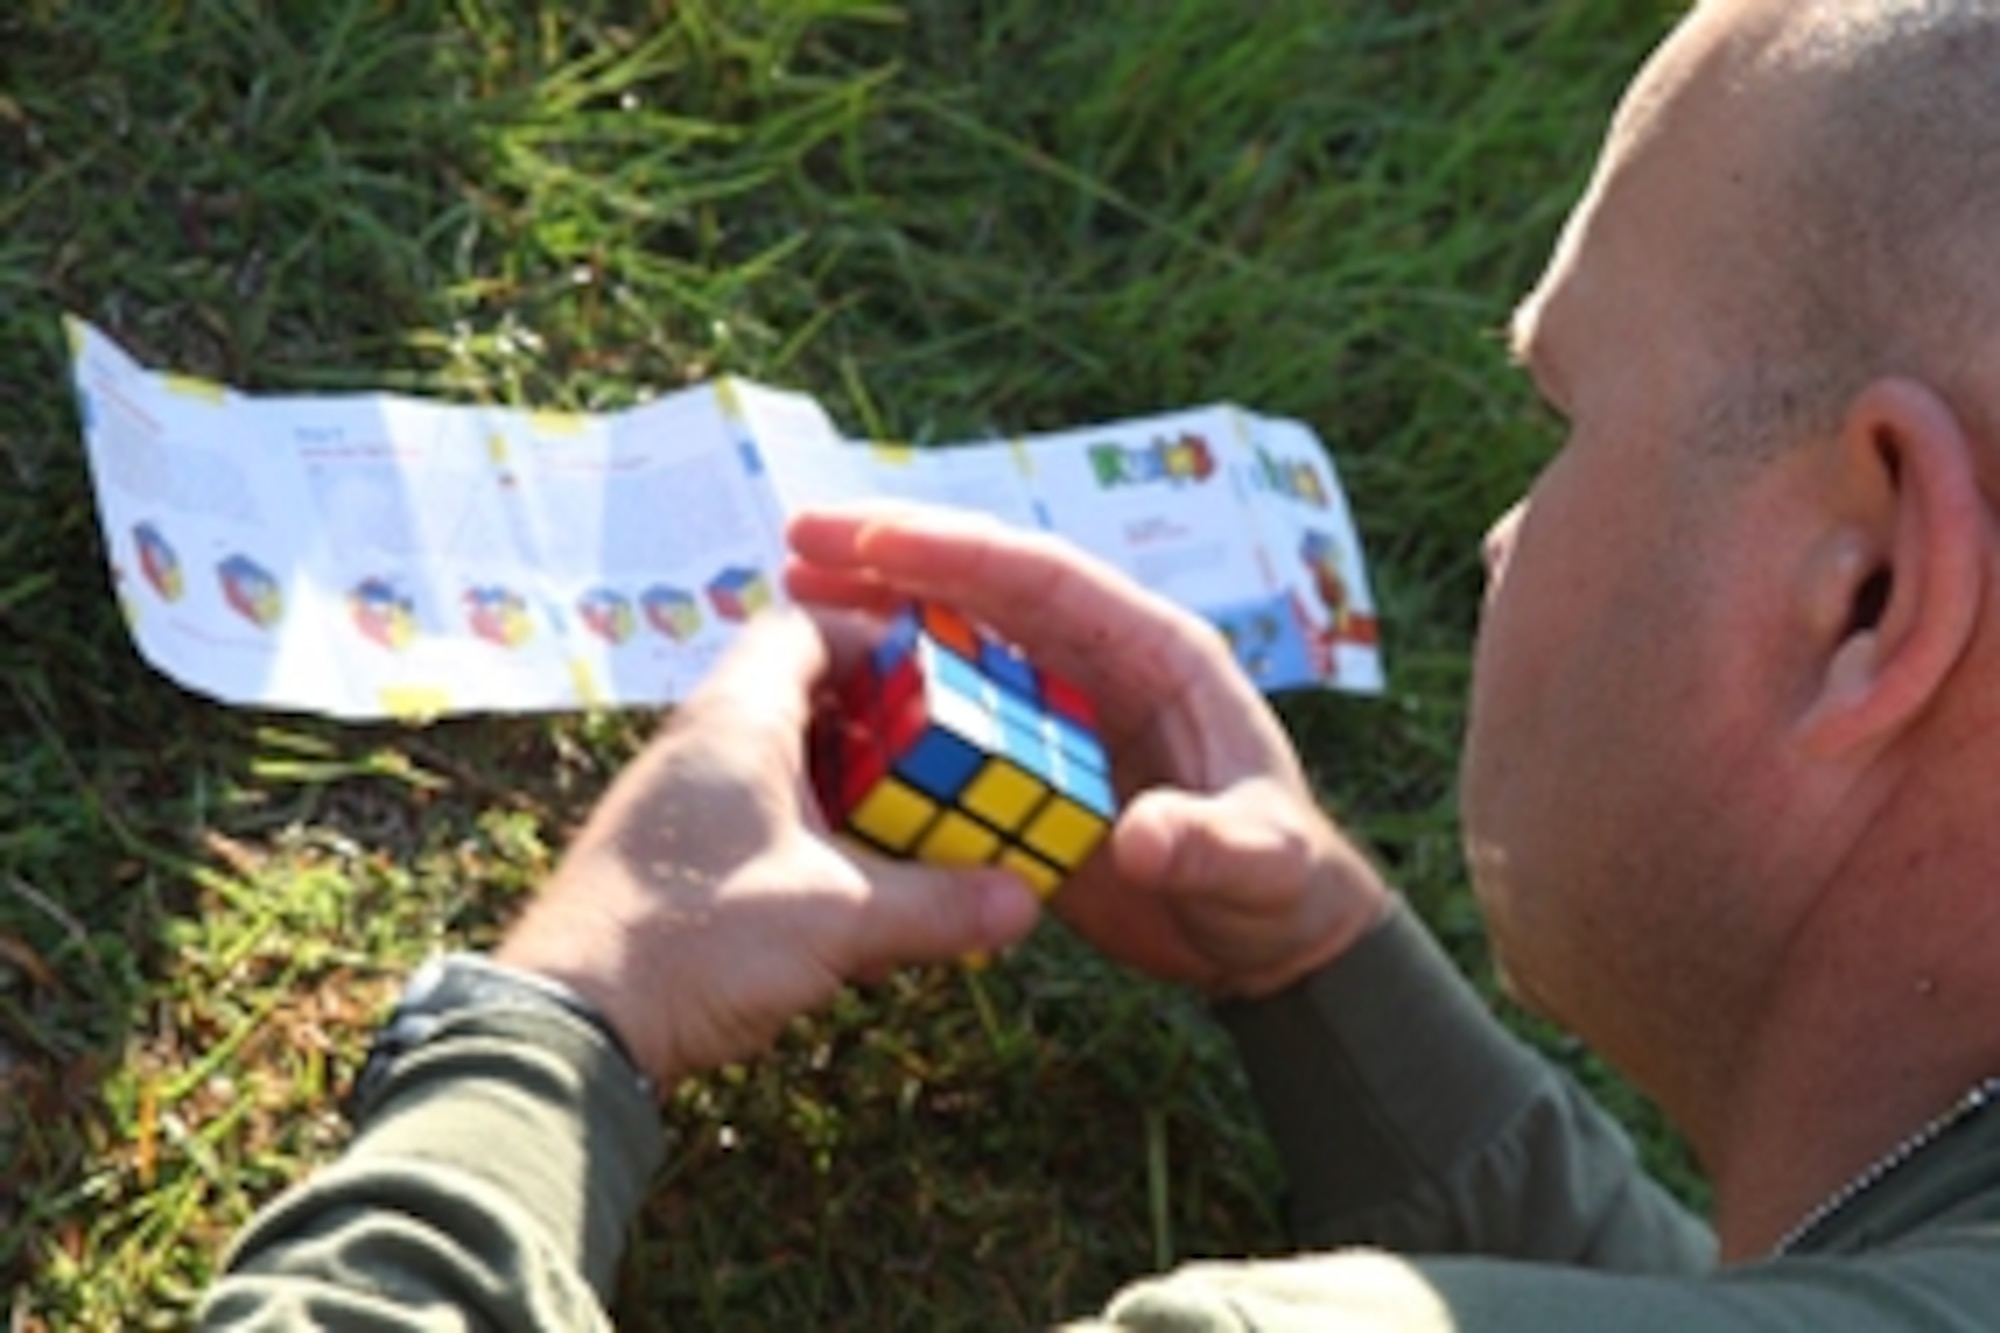 Staying mentally active, such as working puzzles, is a great way to keep your mind active and improve your memory, and enhance your ability to learn and retain new things. (U.S. Marine Corps photo/Lance Cpl. Paul Peterson)